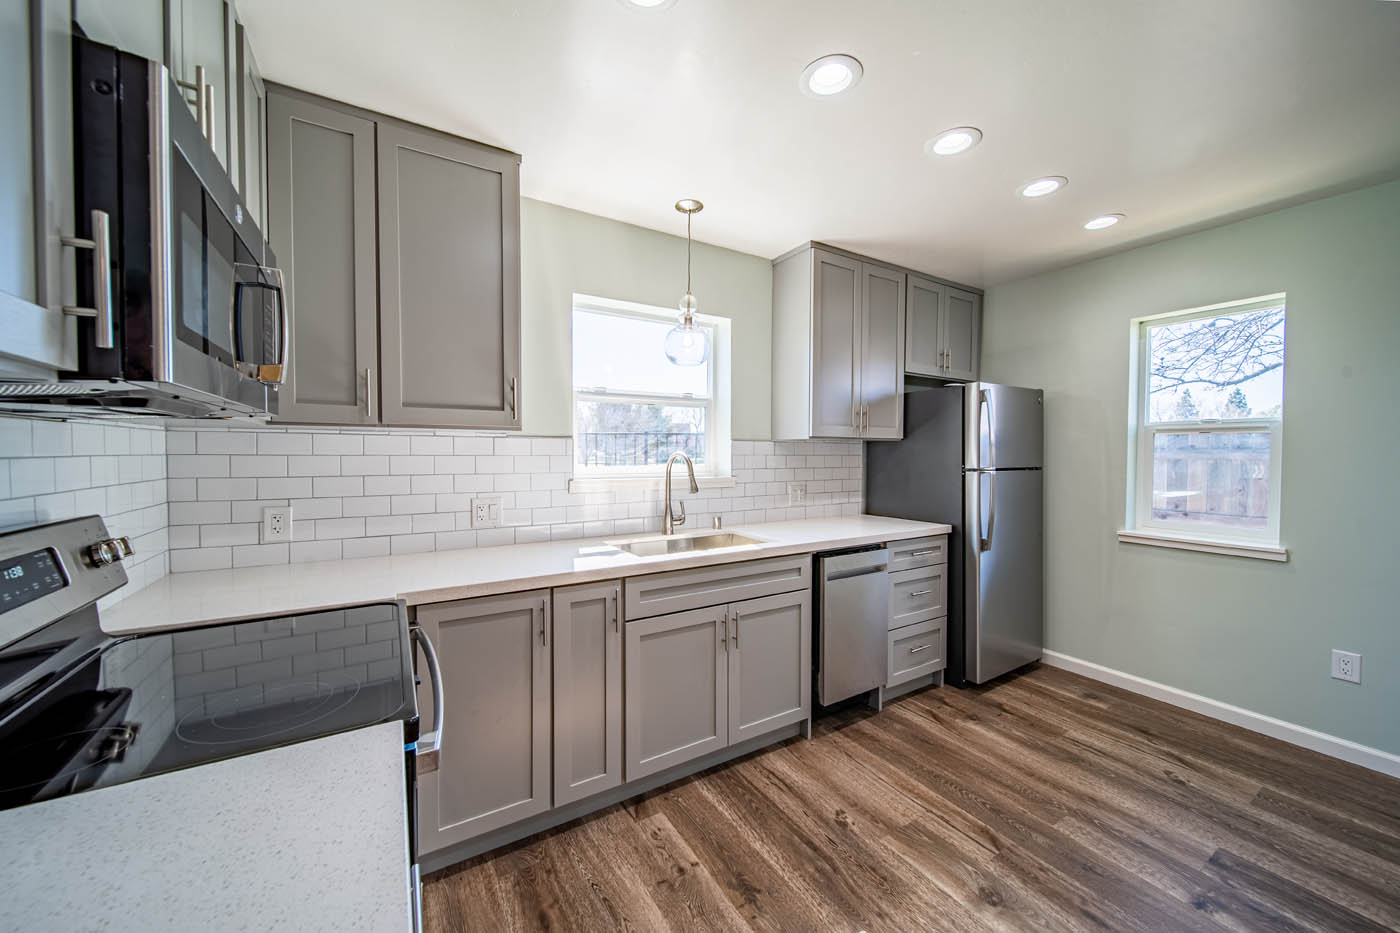 Anchored Tiny Homes Boise ADU Gallery: 2-Bedroom ADUs. - 2